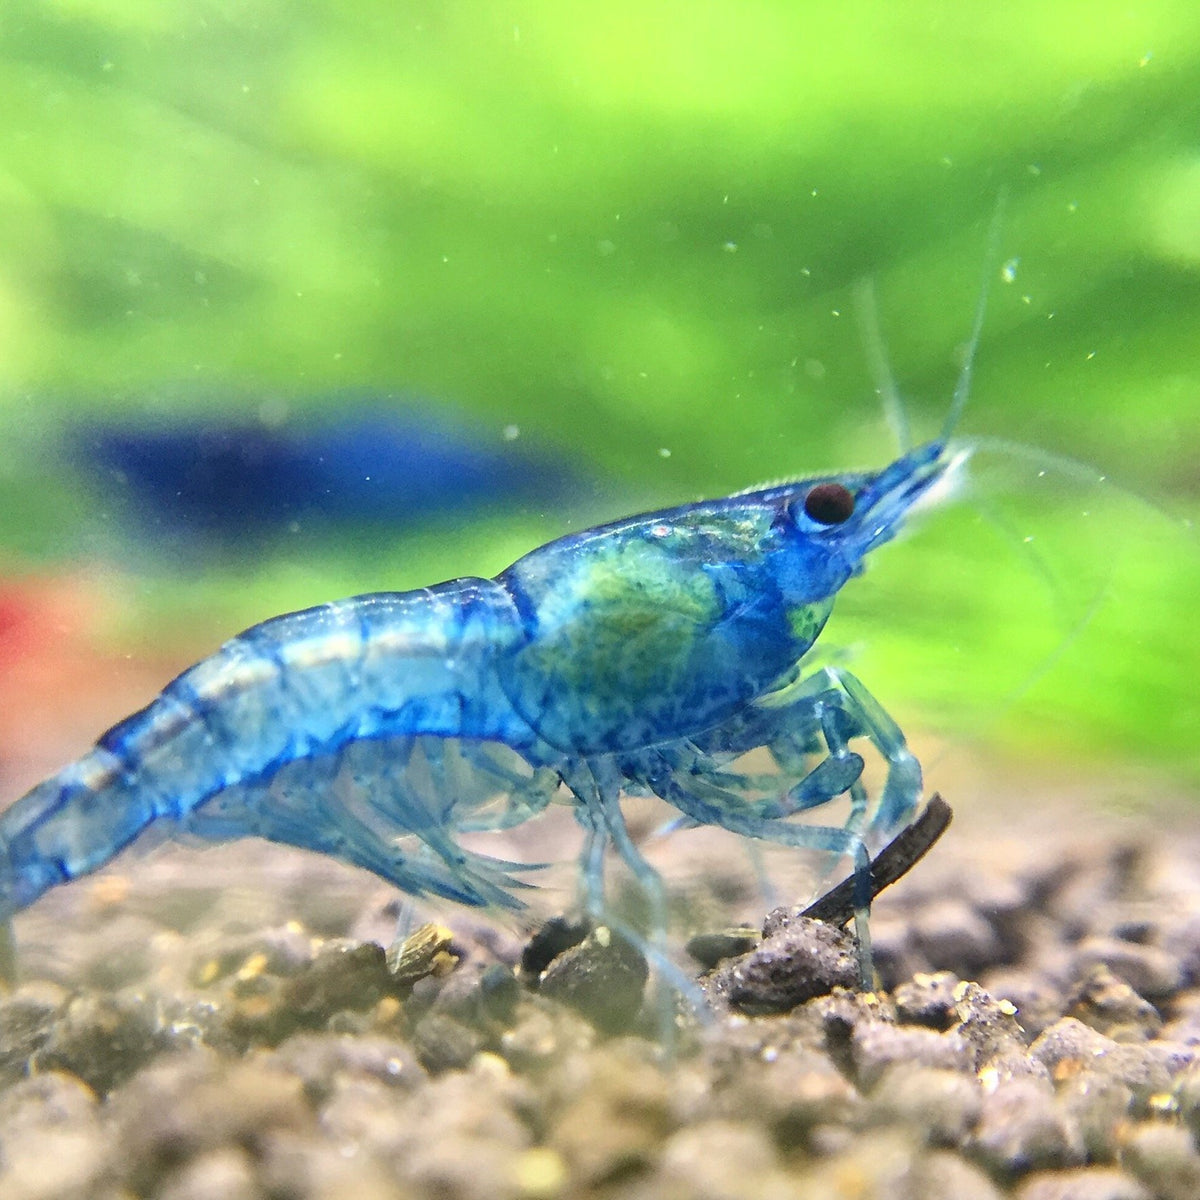 A Beginner's Guide to Keeping Shrimp in a Planted Aquarium — Buce Plant